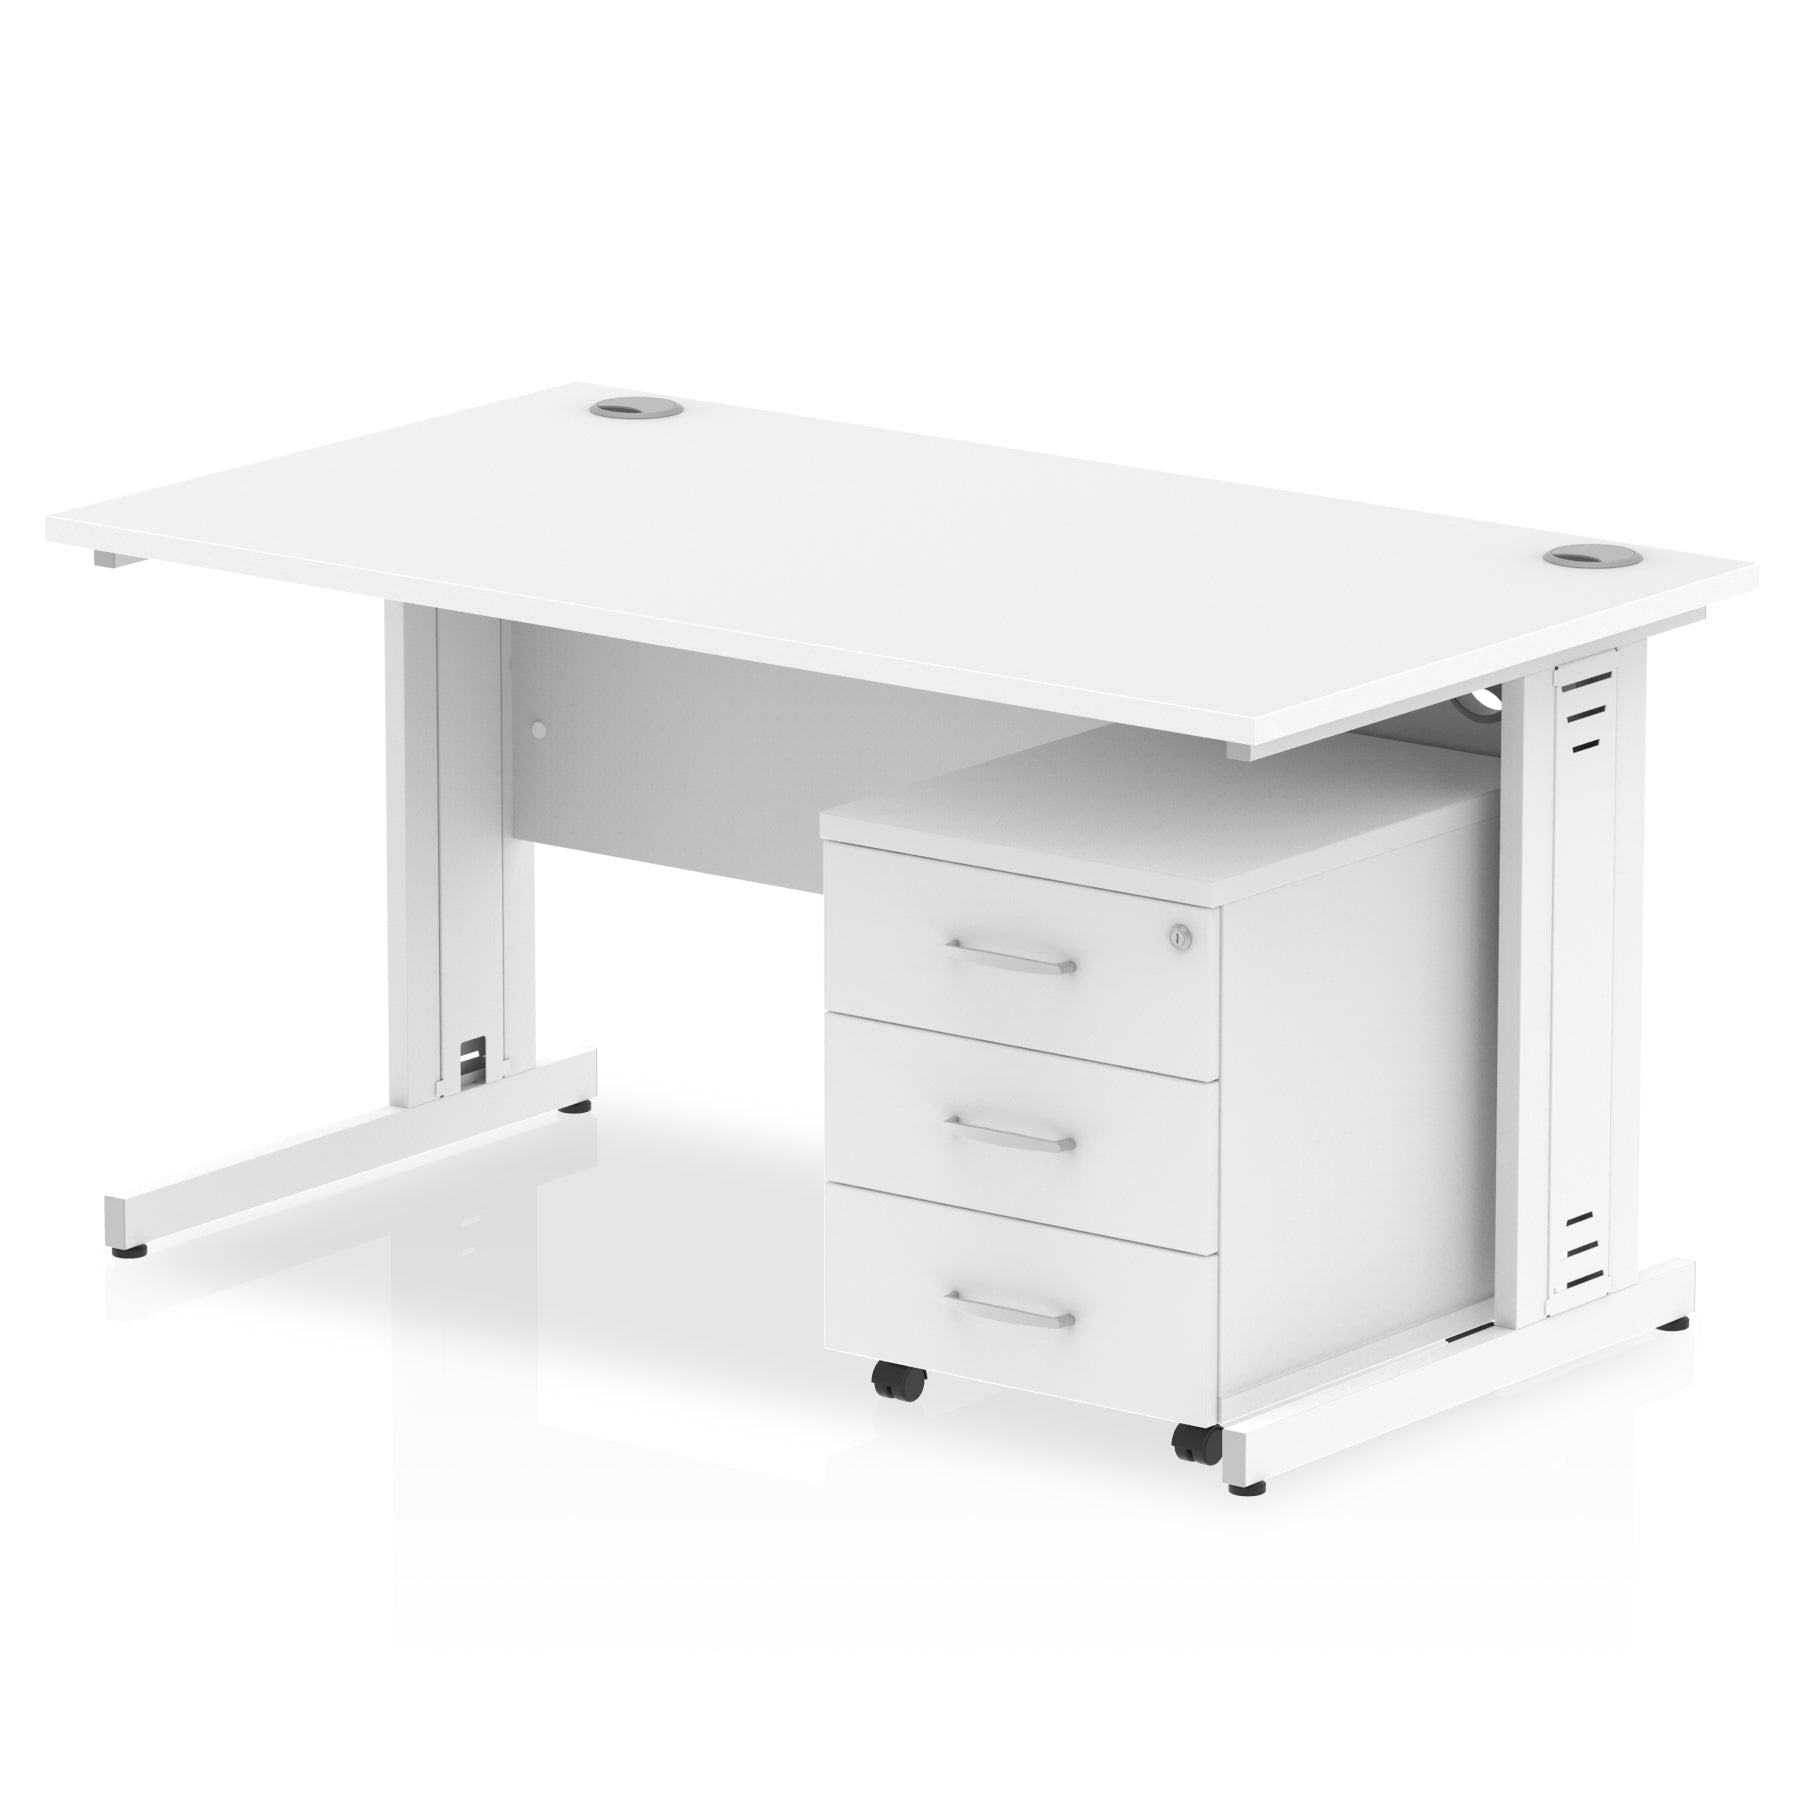 Impulse 1400mm Cable Managed Straight Desk w/ Mobile Pedestal - MFC Rectangular, Self-Assembly, 5-Year Guarantee, 2/3 Lockable Drawers